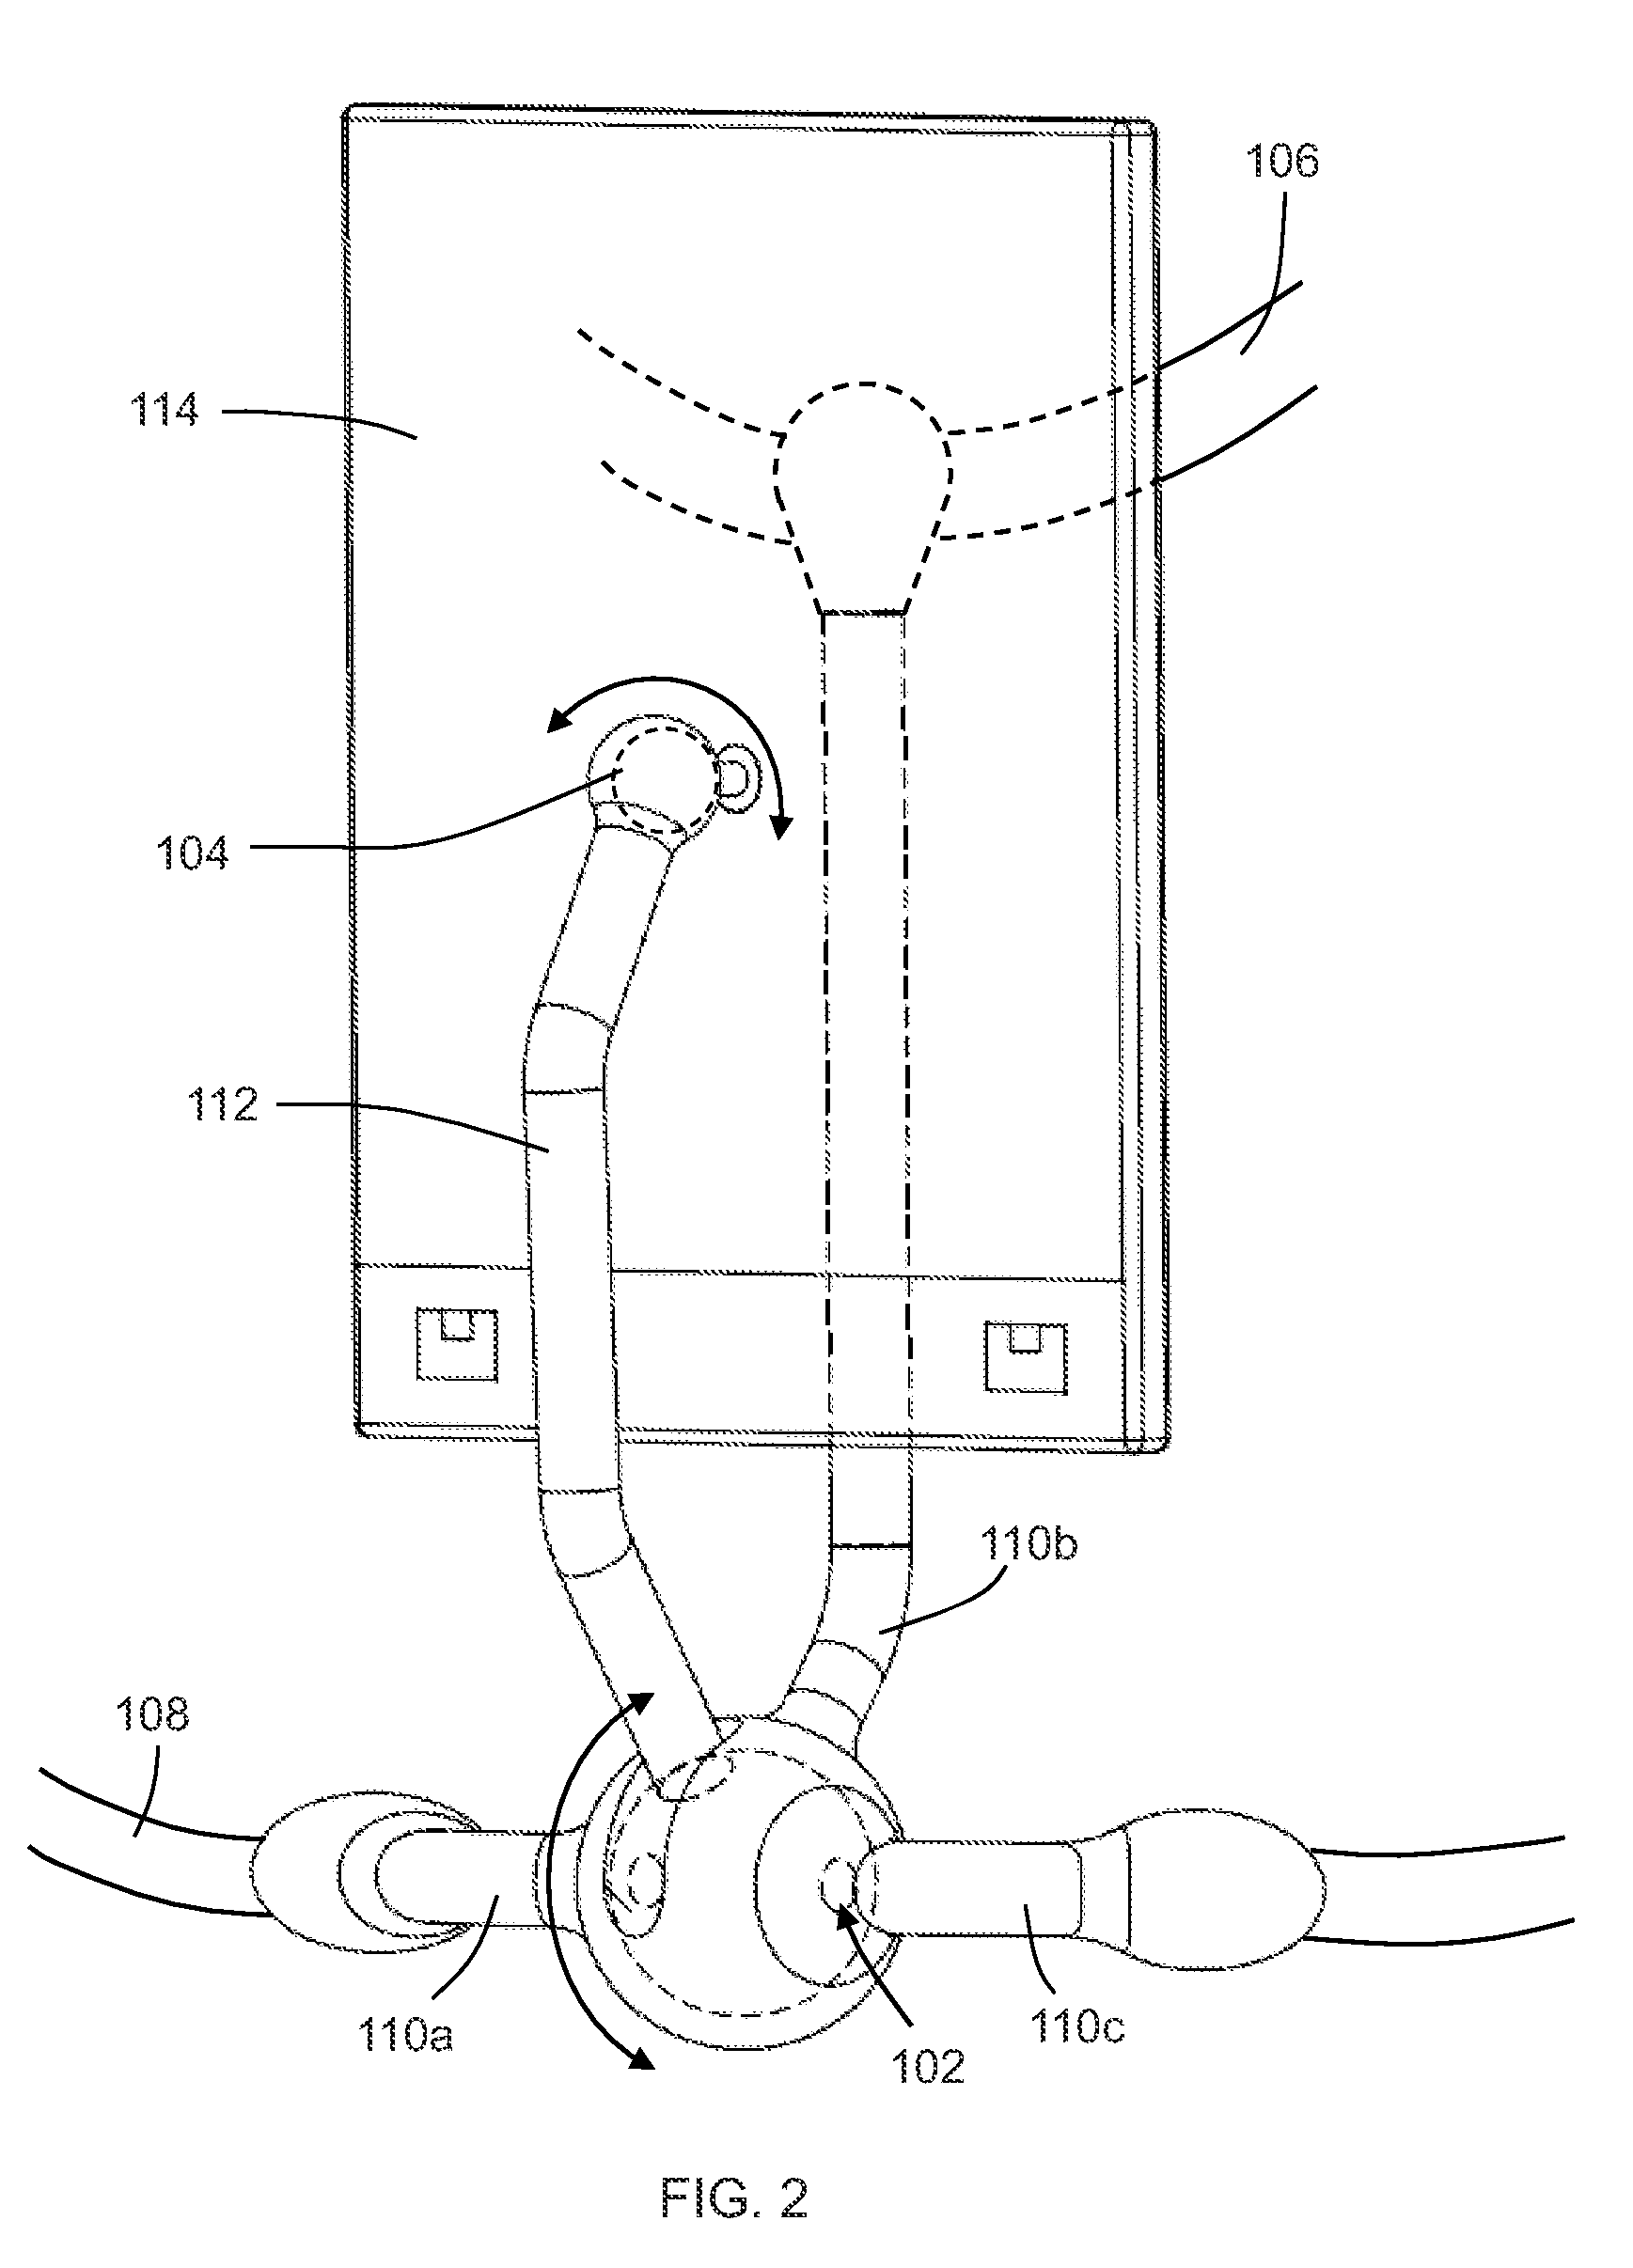 Method and Apparatus for Attaching a Personal Electronic Device